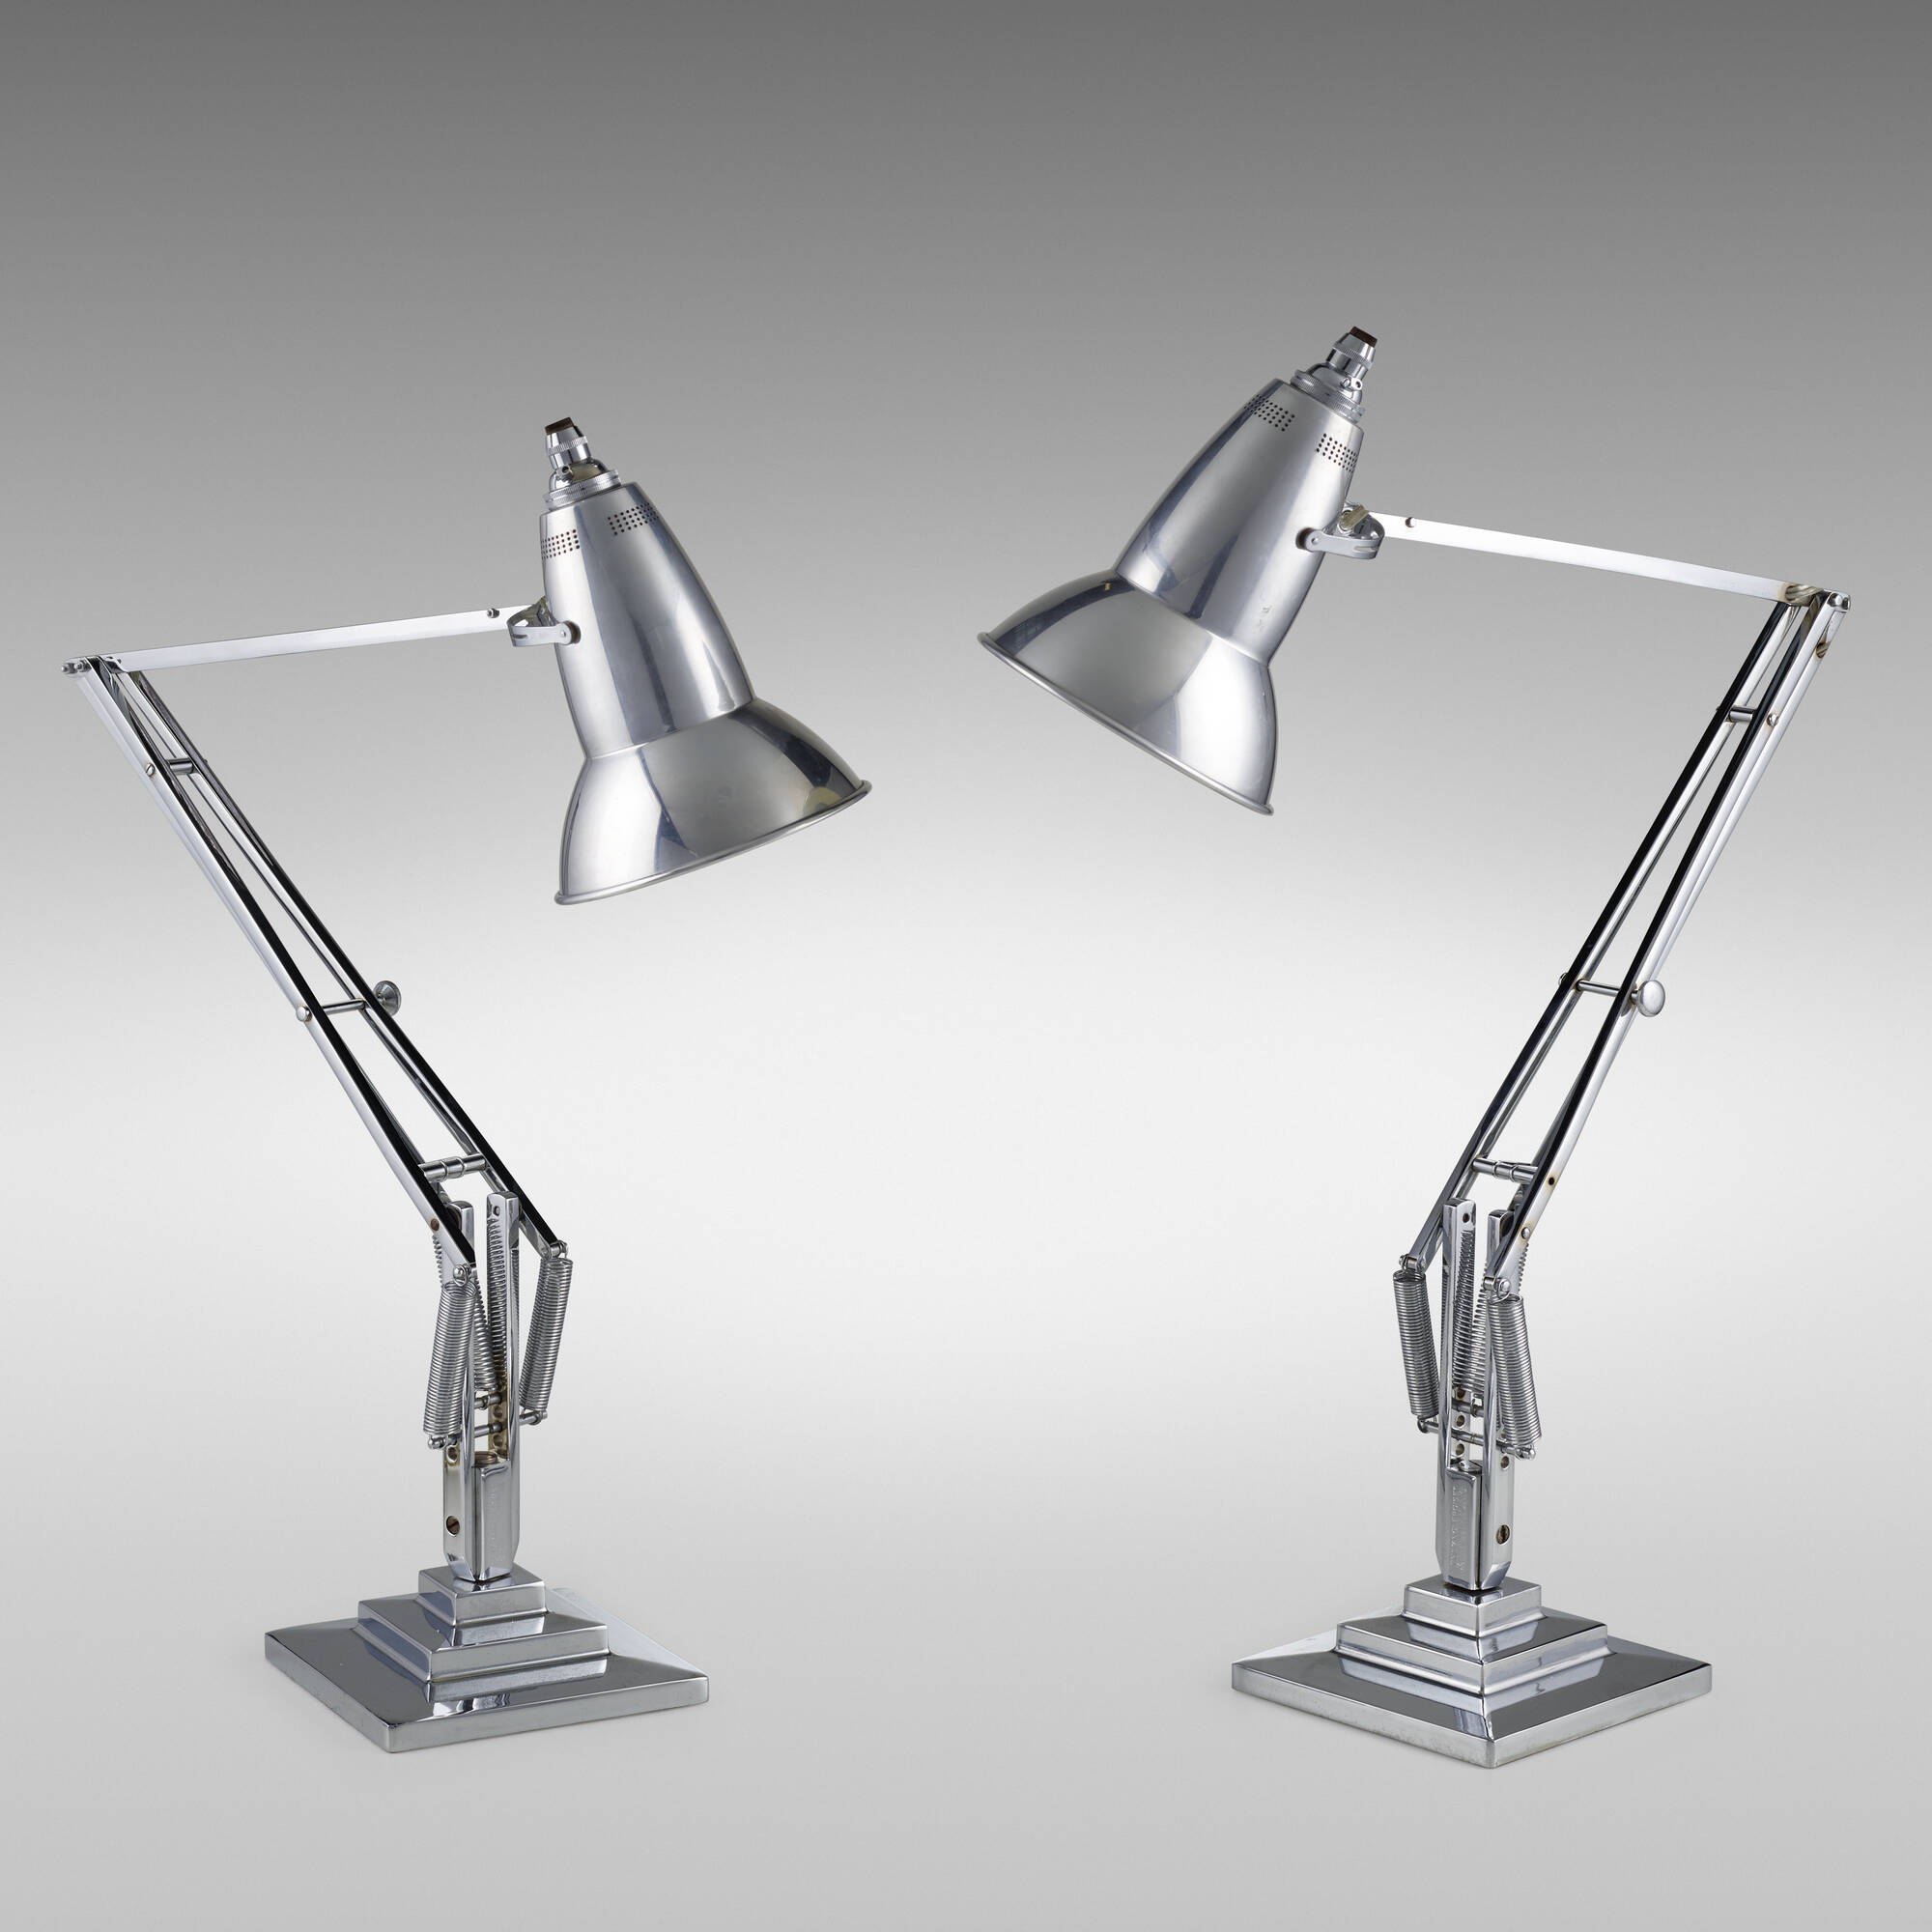 396: GEORGE CARWARDINE, Anglepoise pair Object & Home, November 2021 < Auctions | Rago